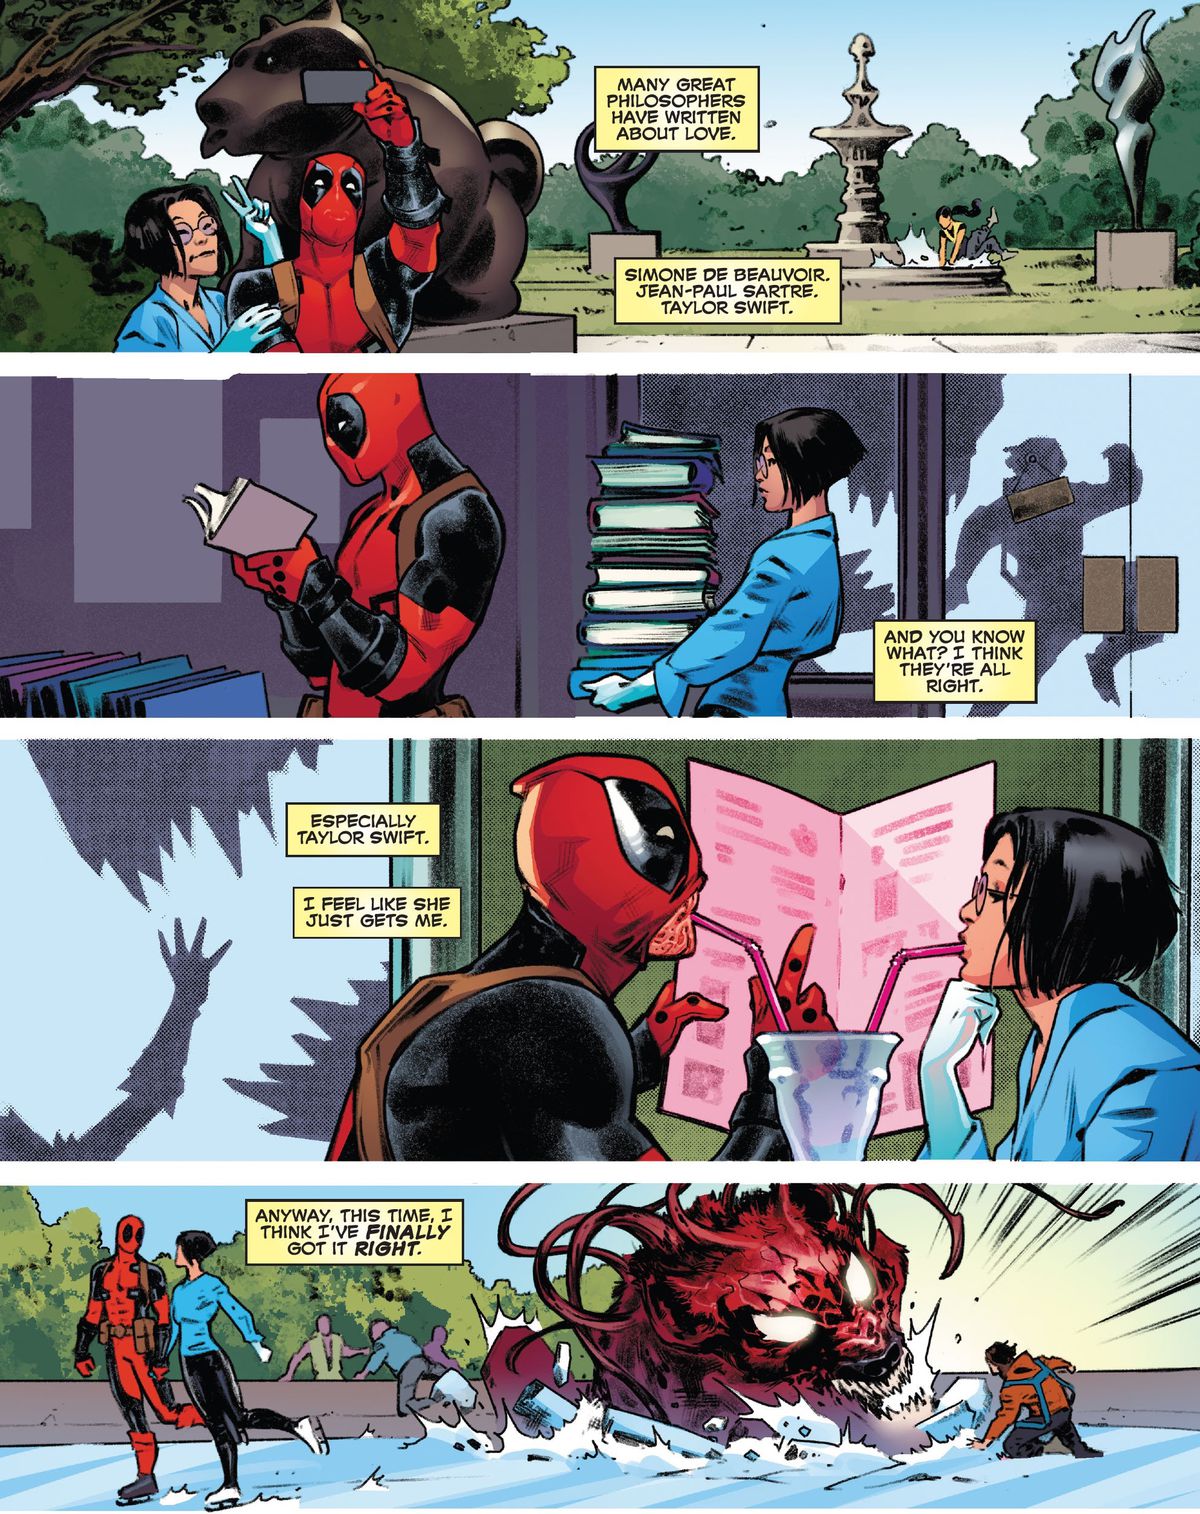 Deadpool and his sweetie, Valentine Vuong, visit a sculpture park, a bookstore, a diner, and an ice skating rink as a big monster secretly hunts people behind them. Deadpool’s narration muses about how this time he’s finally gotten love right, in Deadpool #6 (2023).